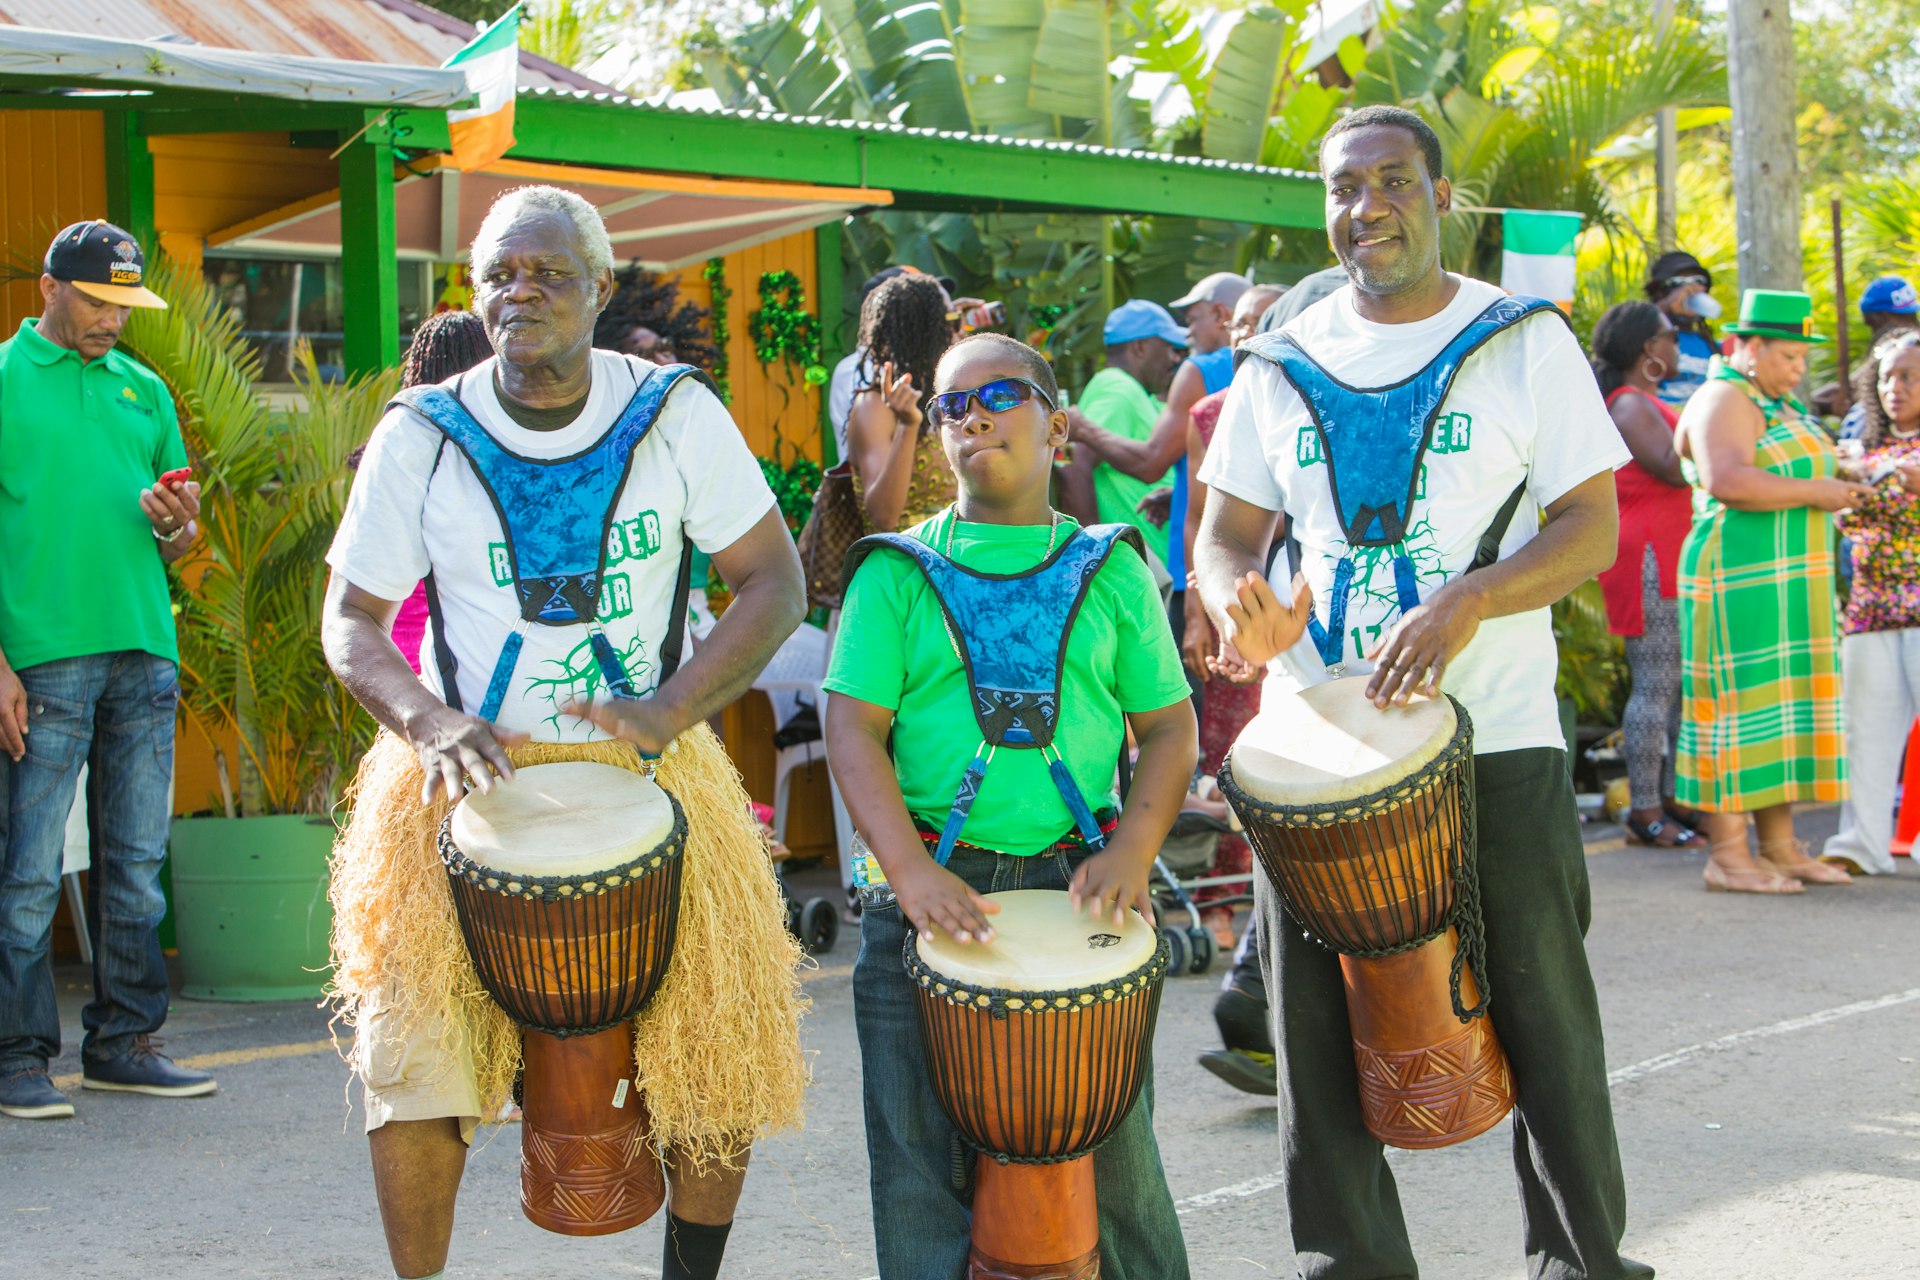 A trio of men tap on drums with their hands during Montserrat's St. Patrick's celebrations